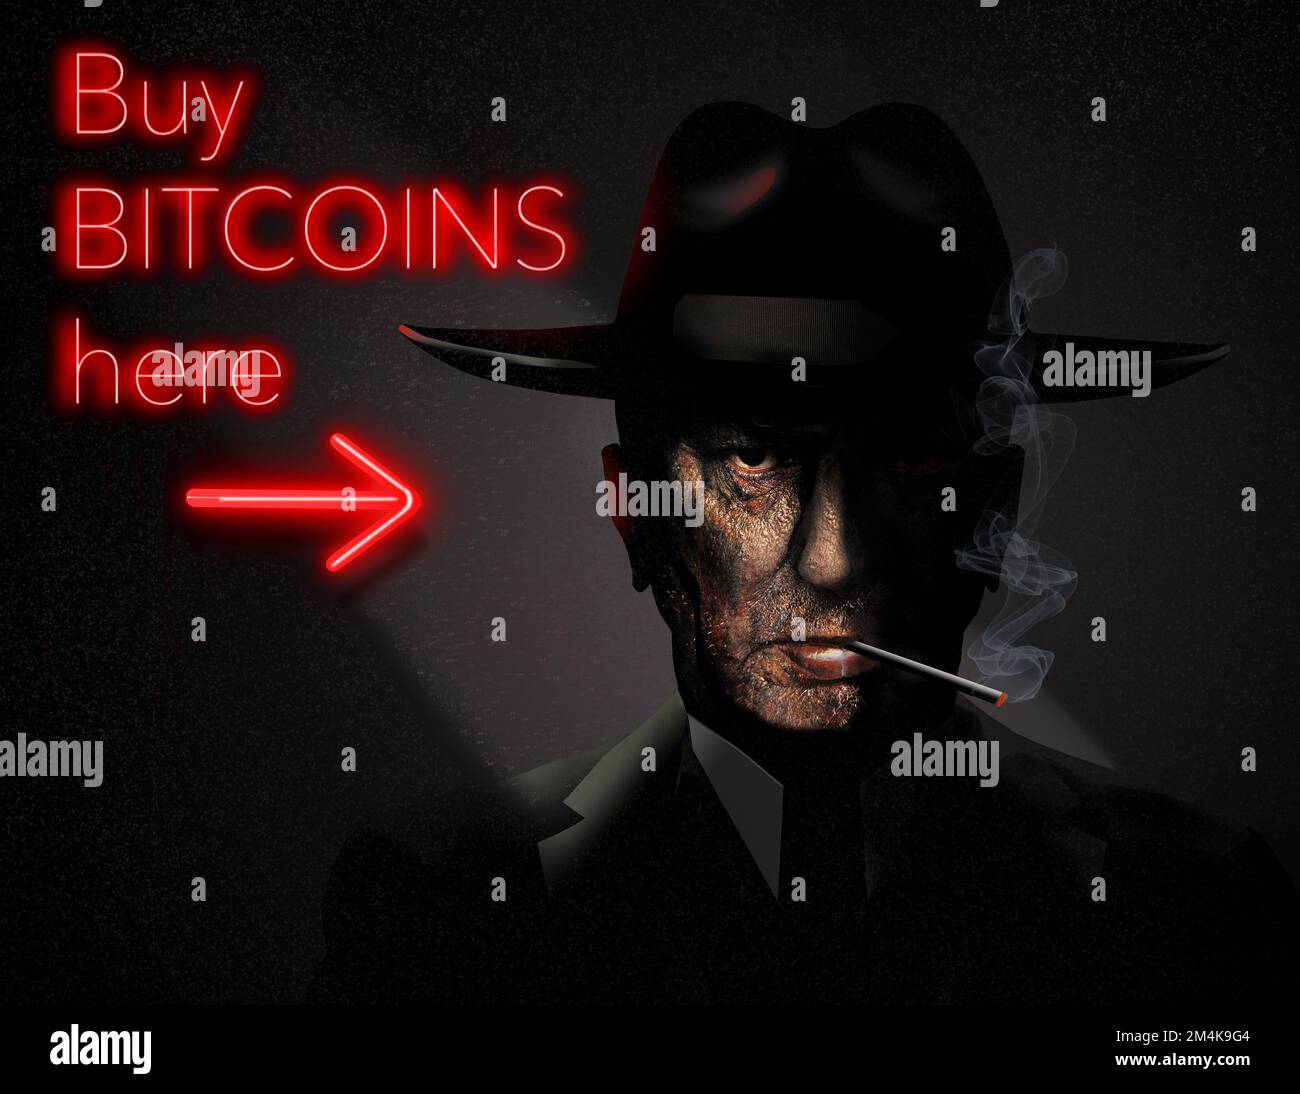 A neon sign indicates you can buy bit coins from a sinister looking and unreliable source in this 3-d illustration about bitcoin. Stock Photo